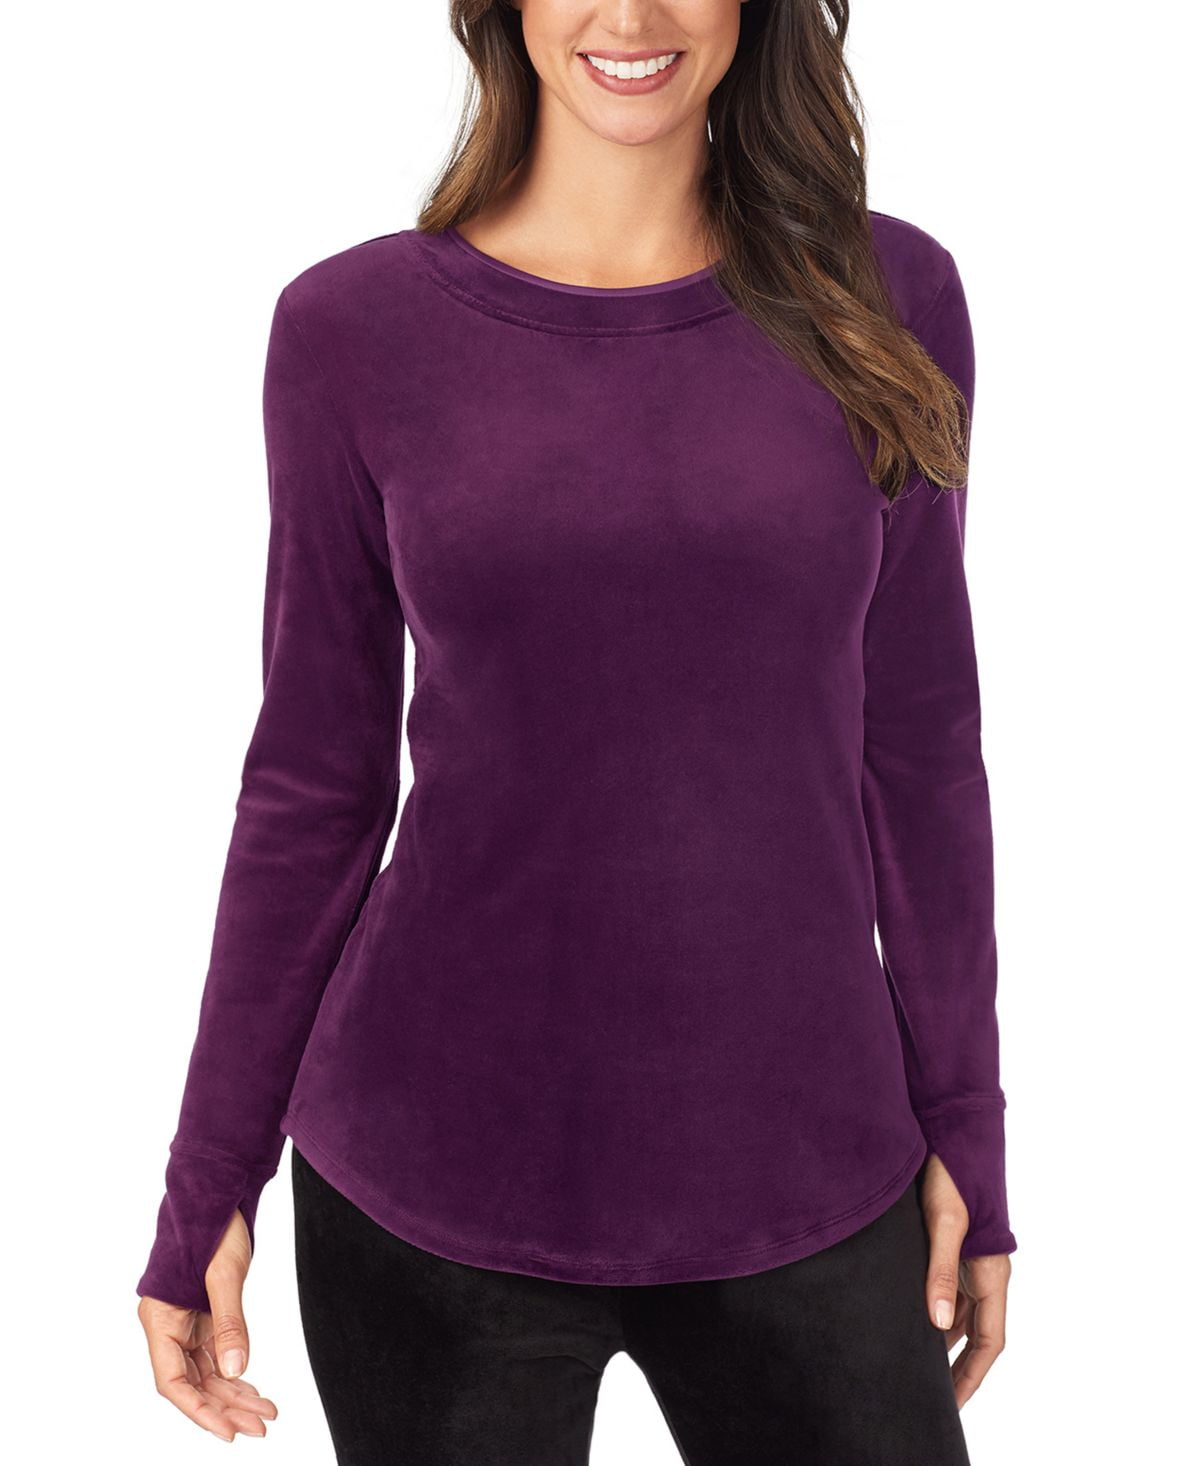 Cuddl Duds Womens Double Plush Velour Long Sleeve Top